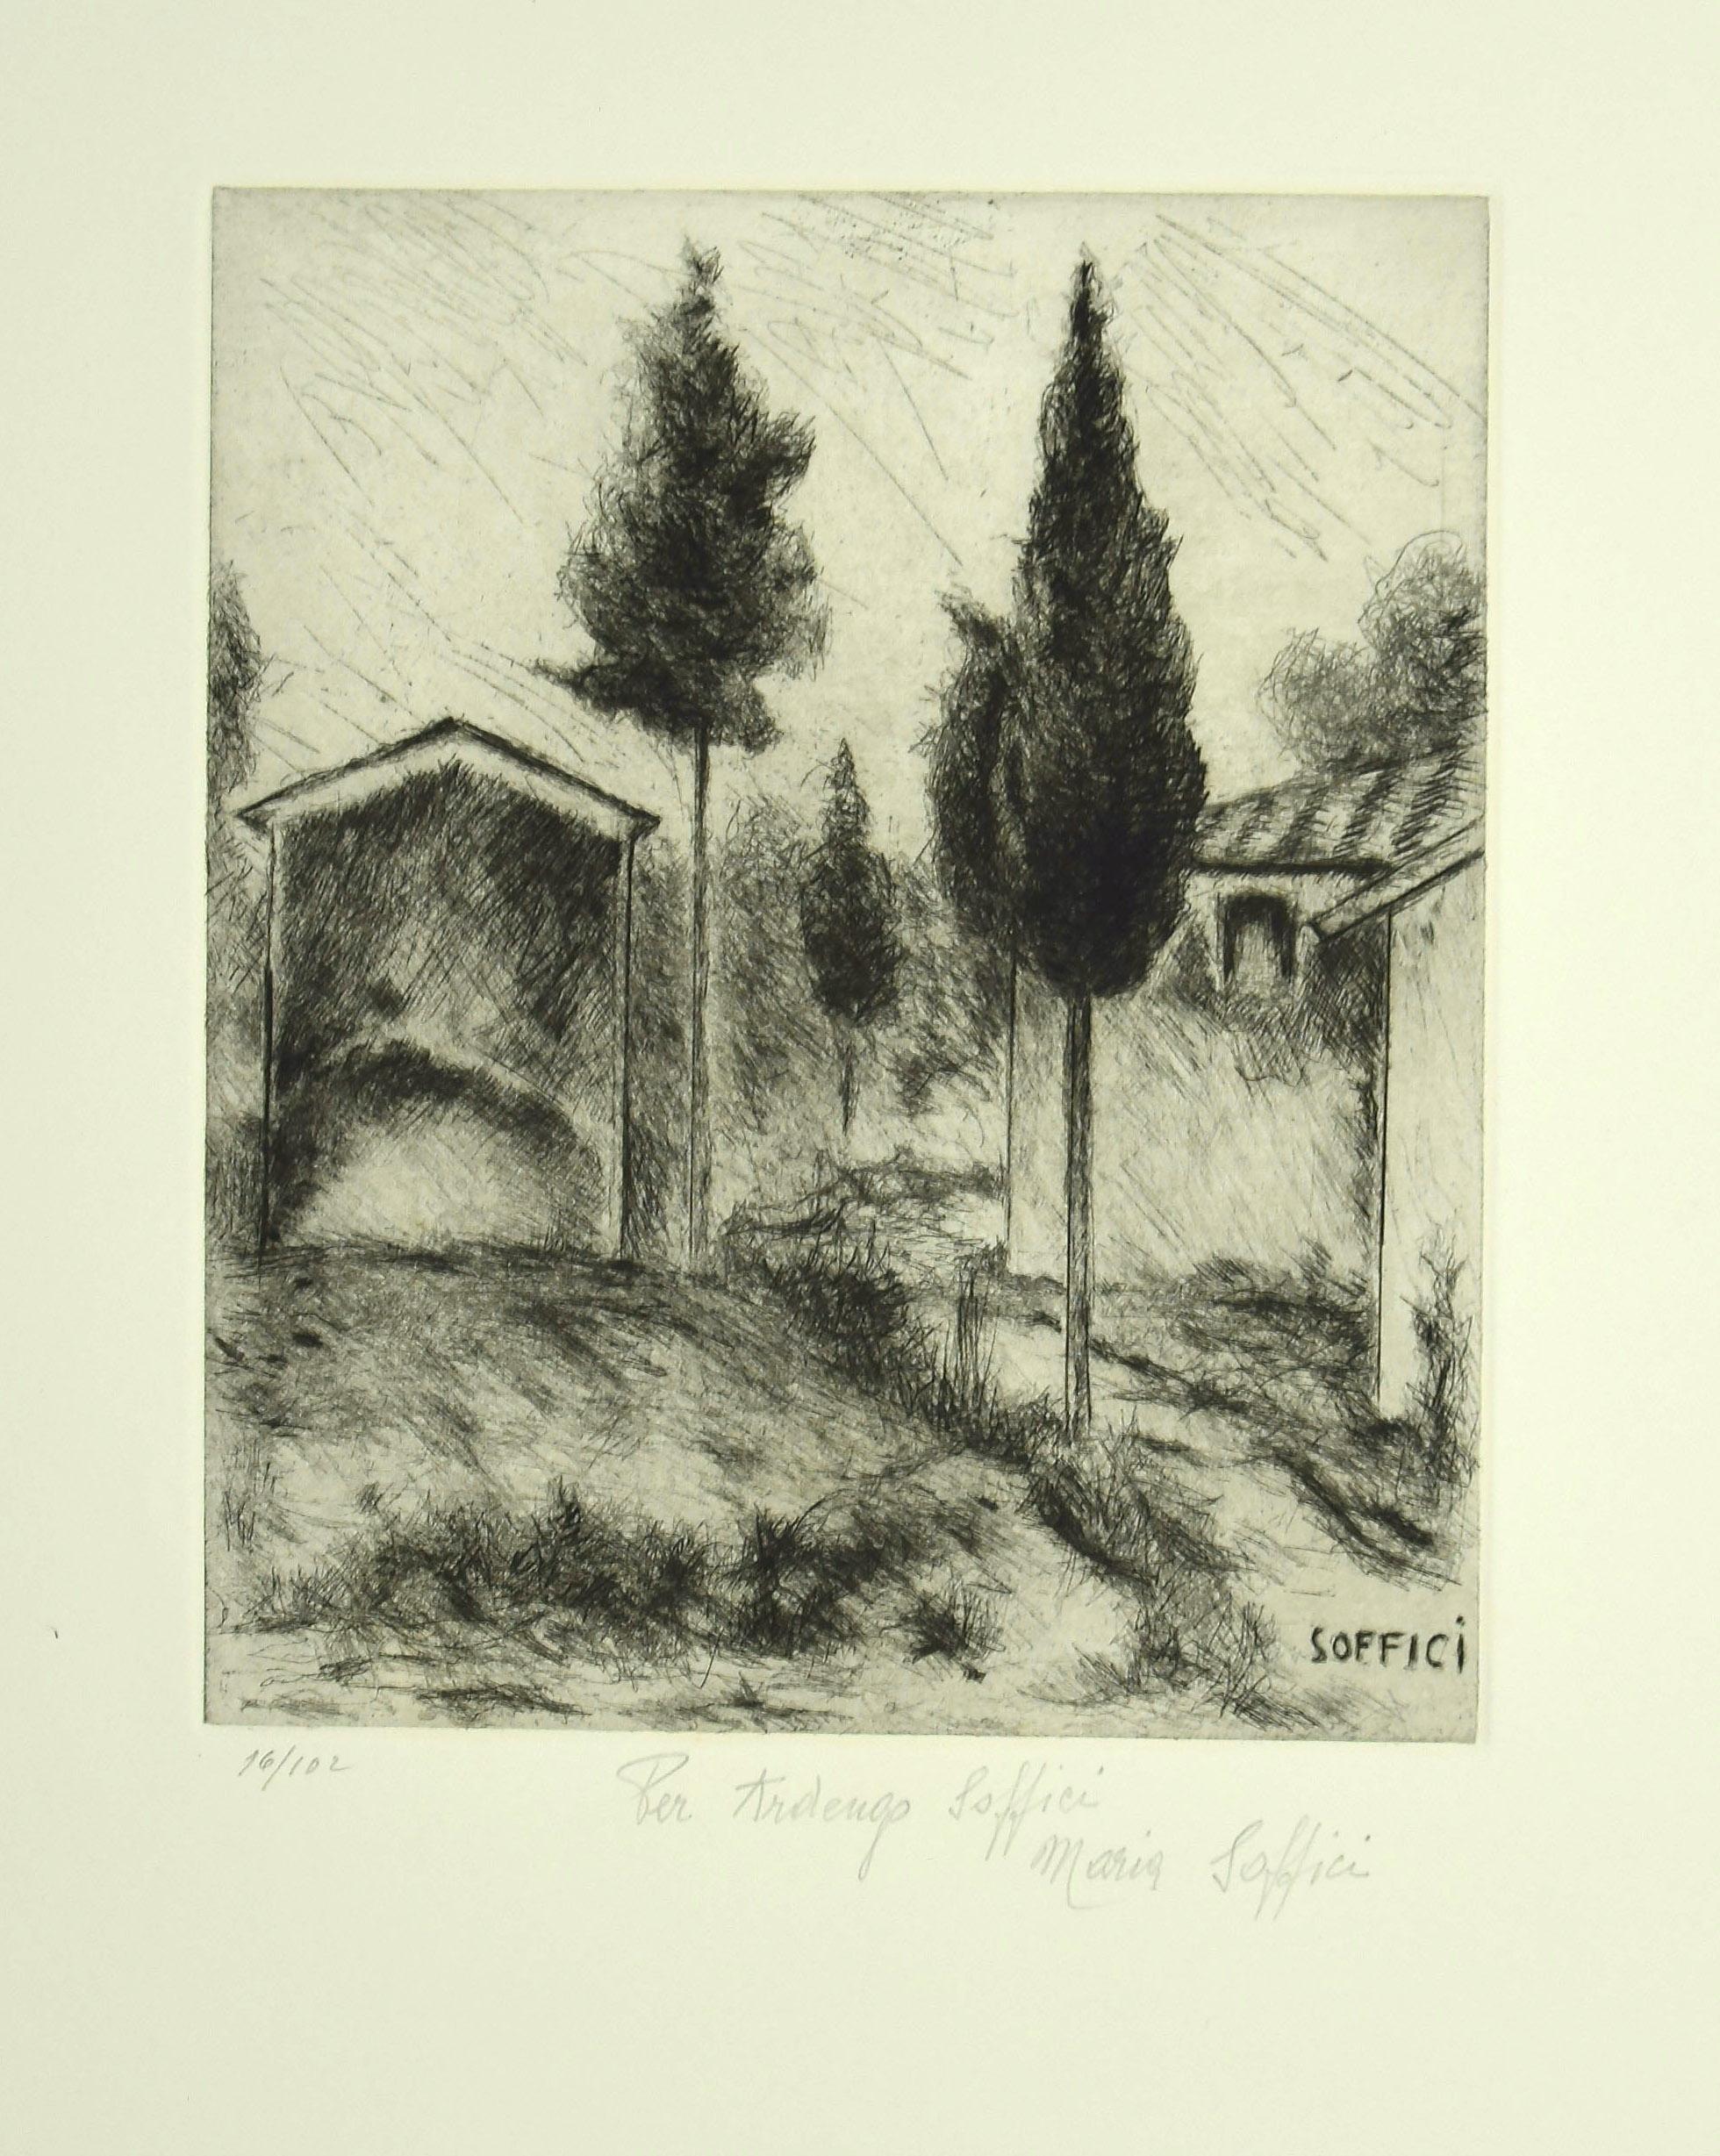 Ardengo Soffici Landscape Print - Poggio a Caiano - Etching and Drypoint by A. Soffici - 1964